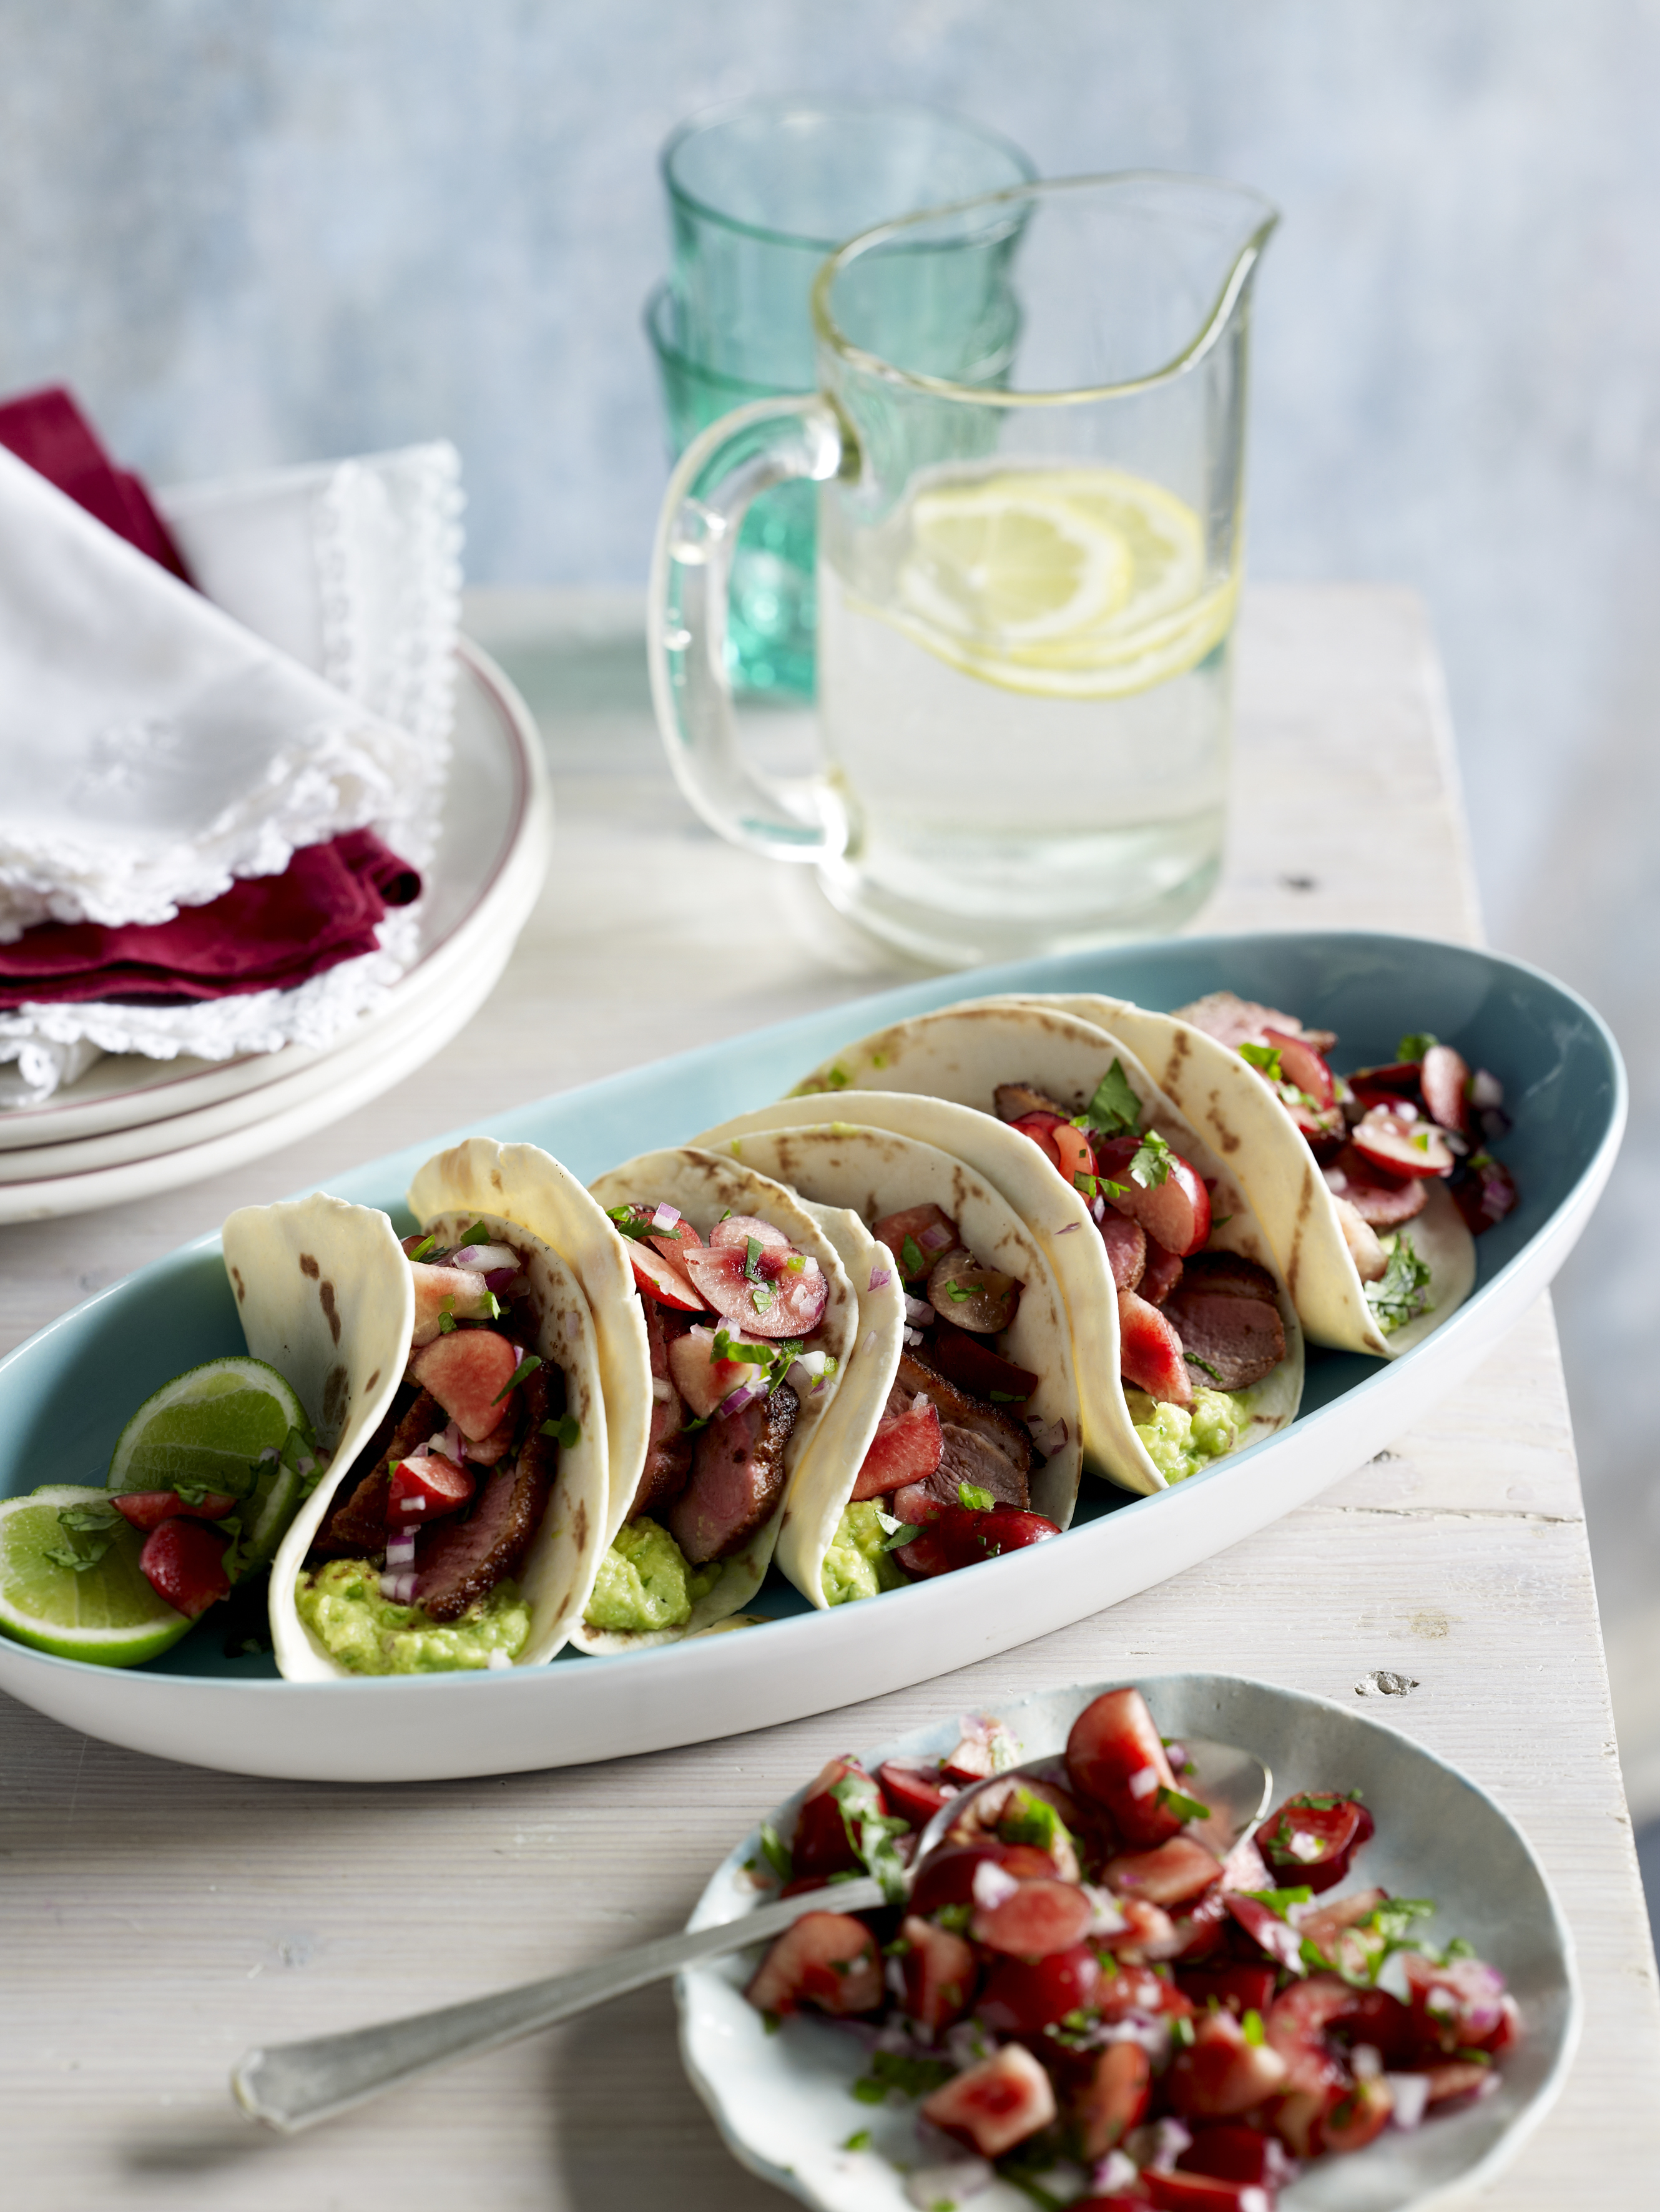 Cherry and duck tacos